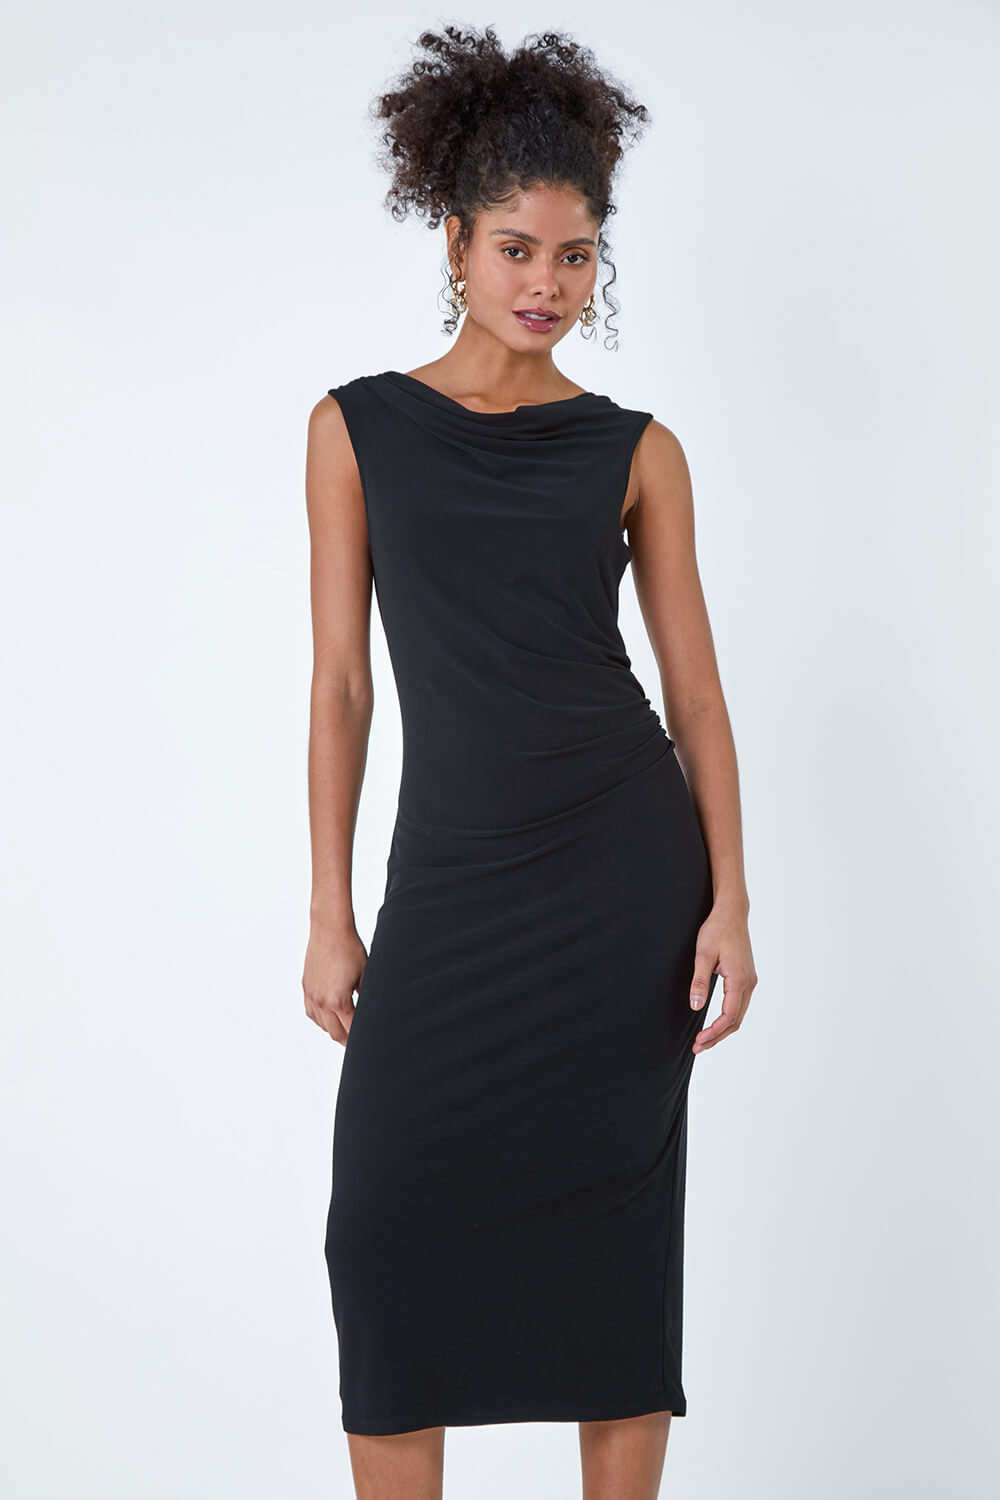 Black Ruched Cowl Neck Stretch Midi Dress, Image 3 of 5